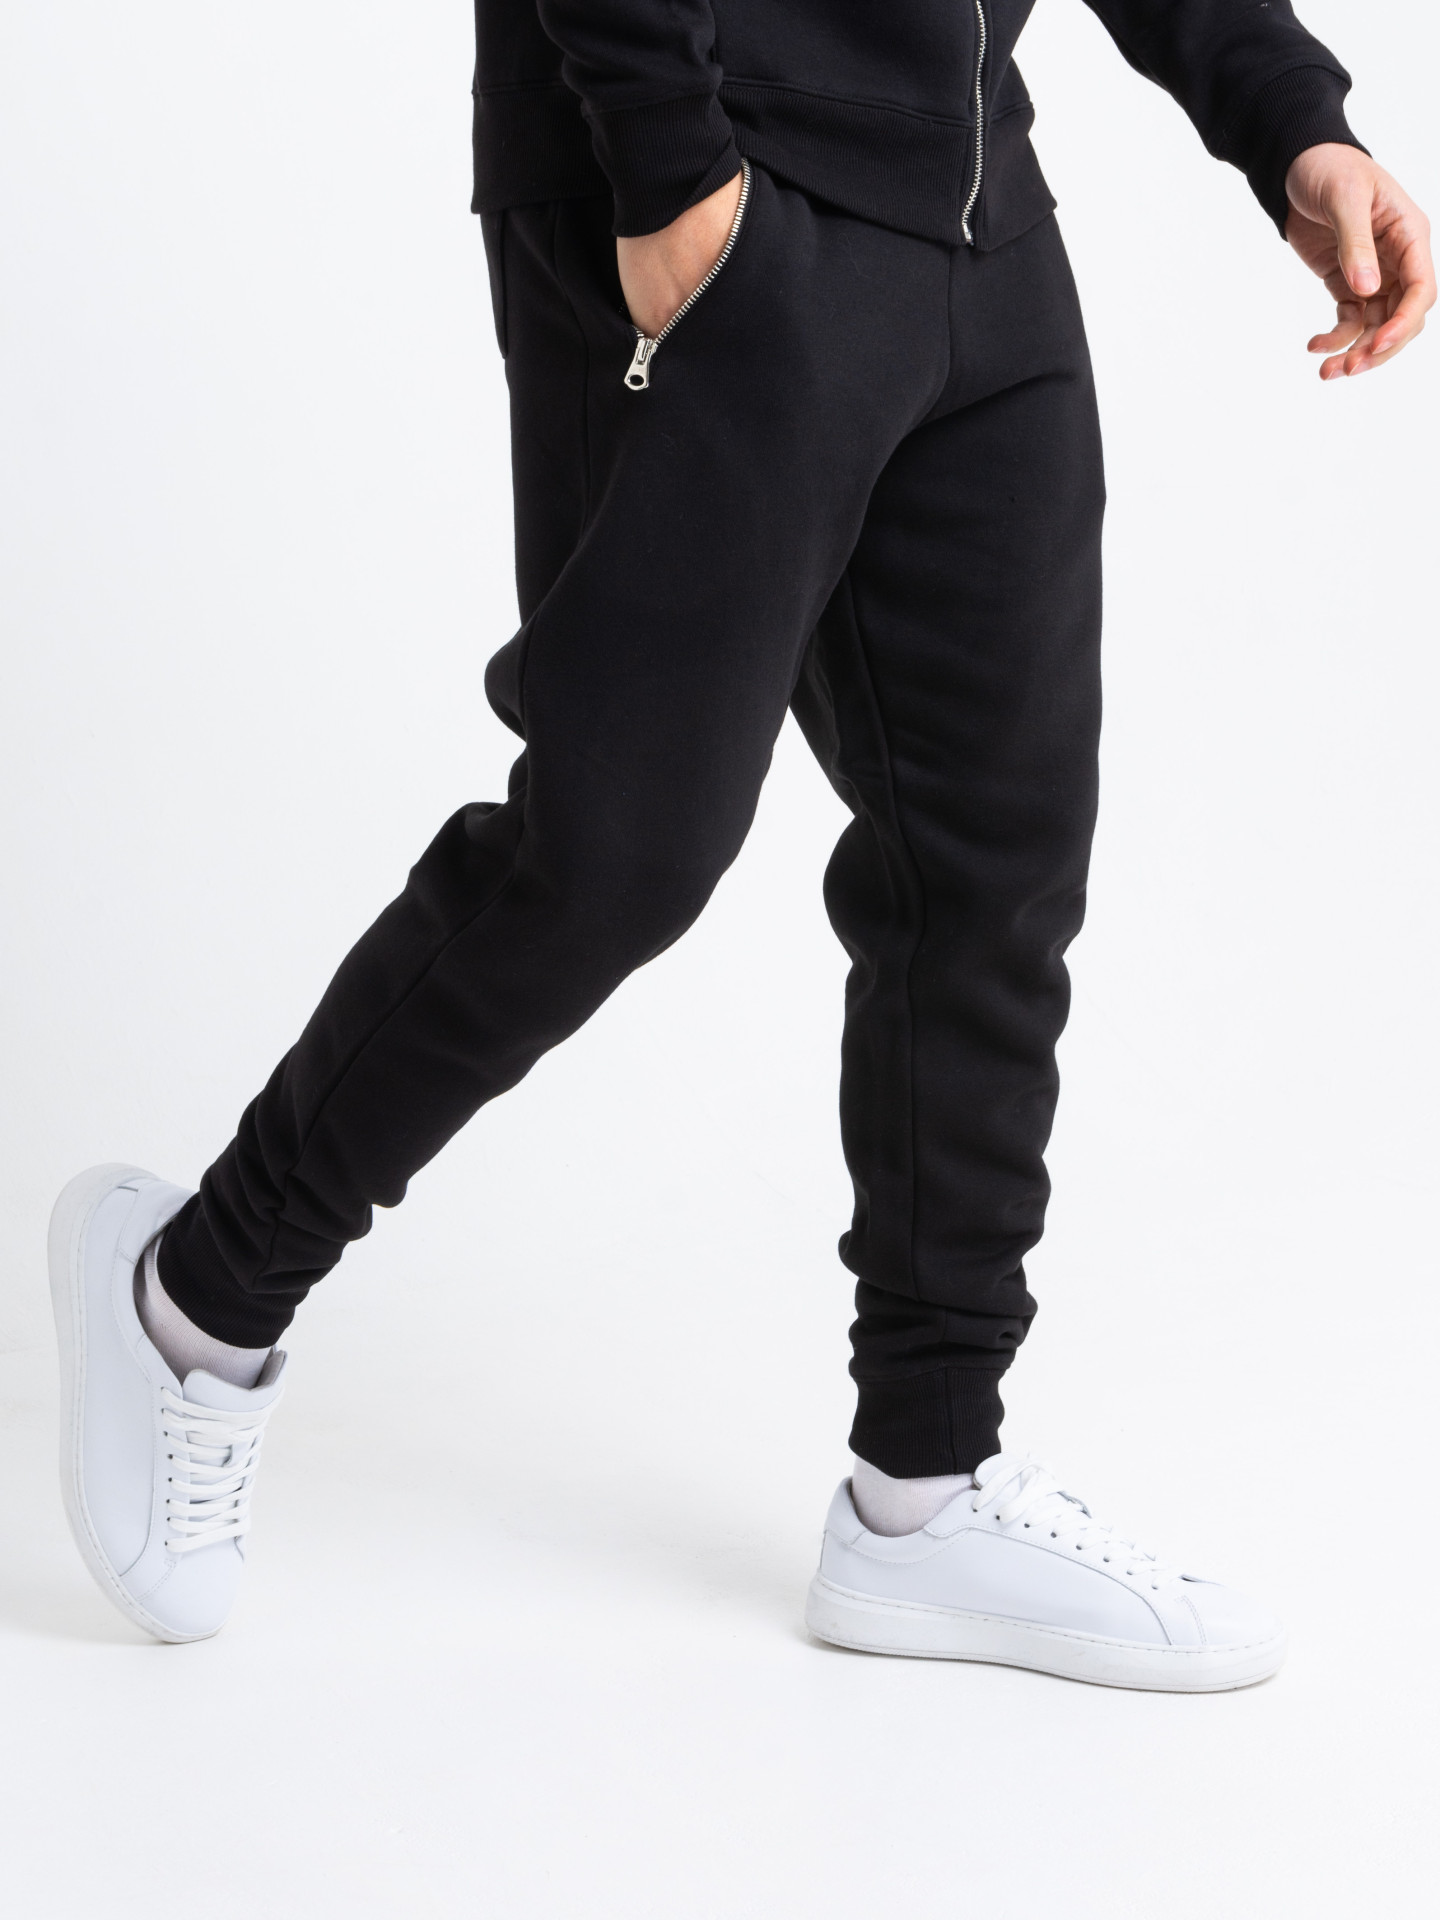 Silver Zip Tracksuit in Black | Men's Clothing & Fashion | HisColumn